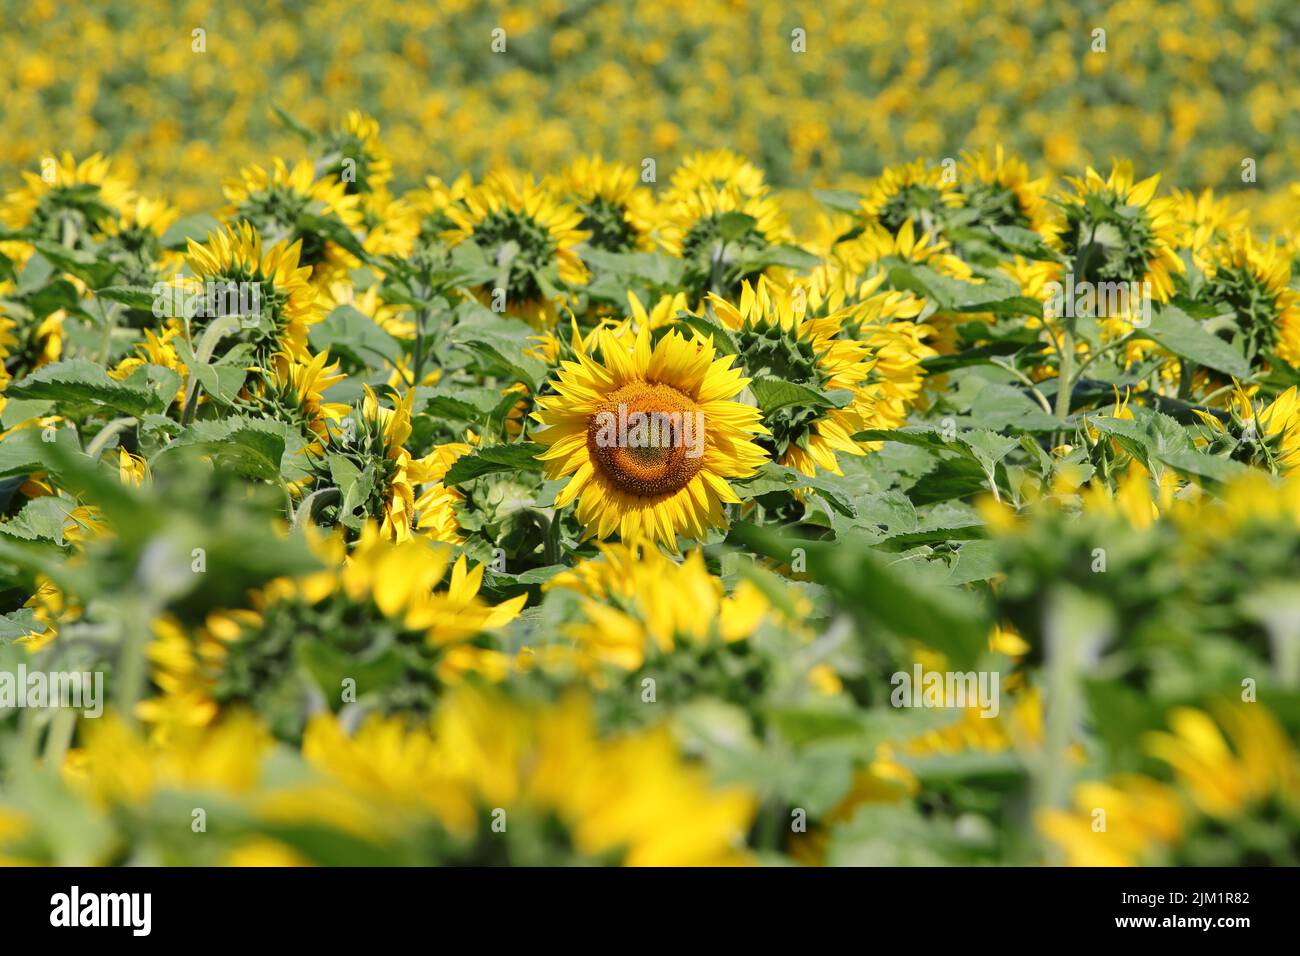 Photograph of a blooming sunflower field, selective flocus Stock Photo